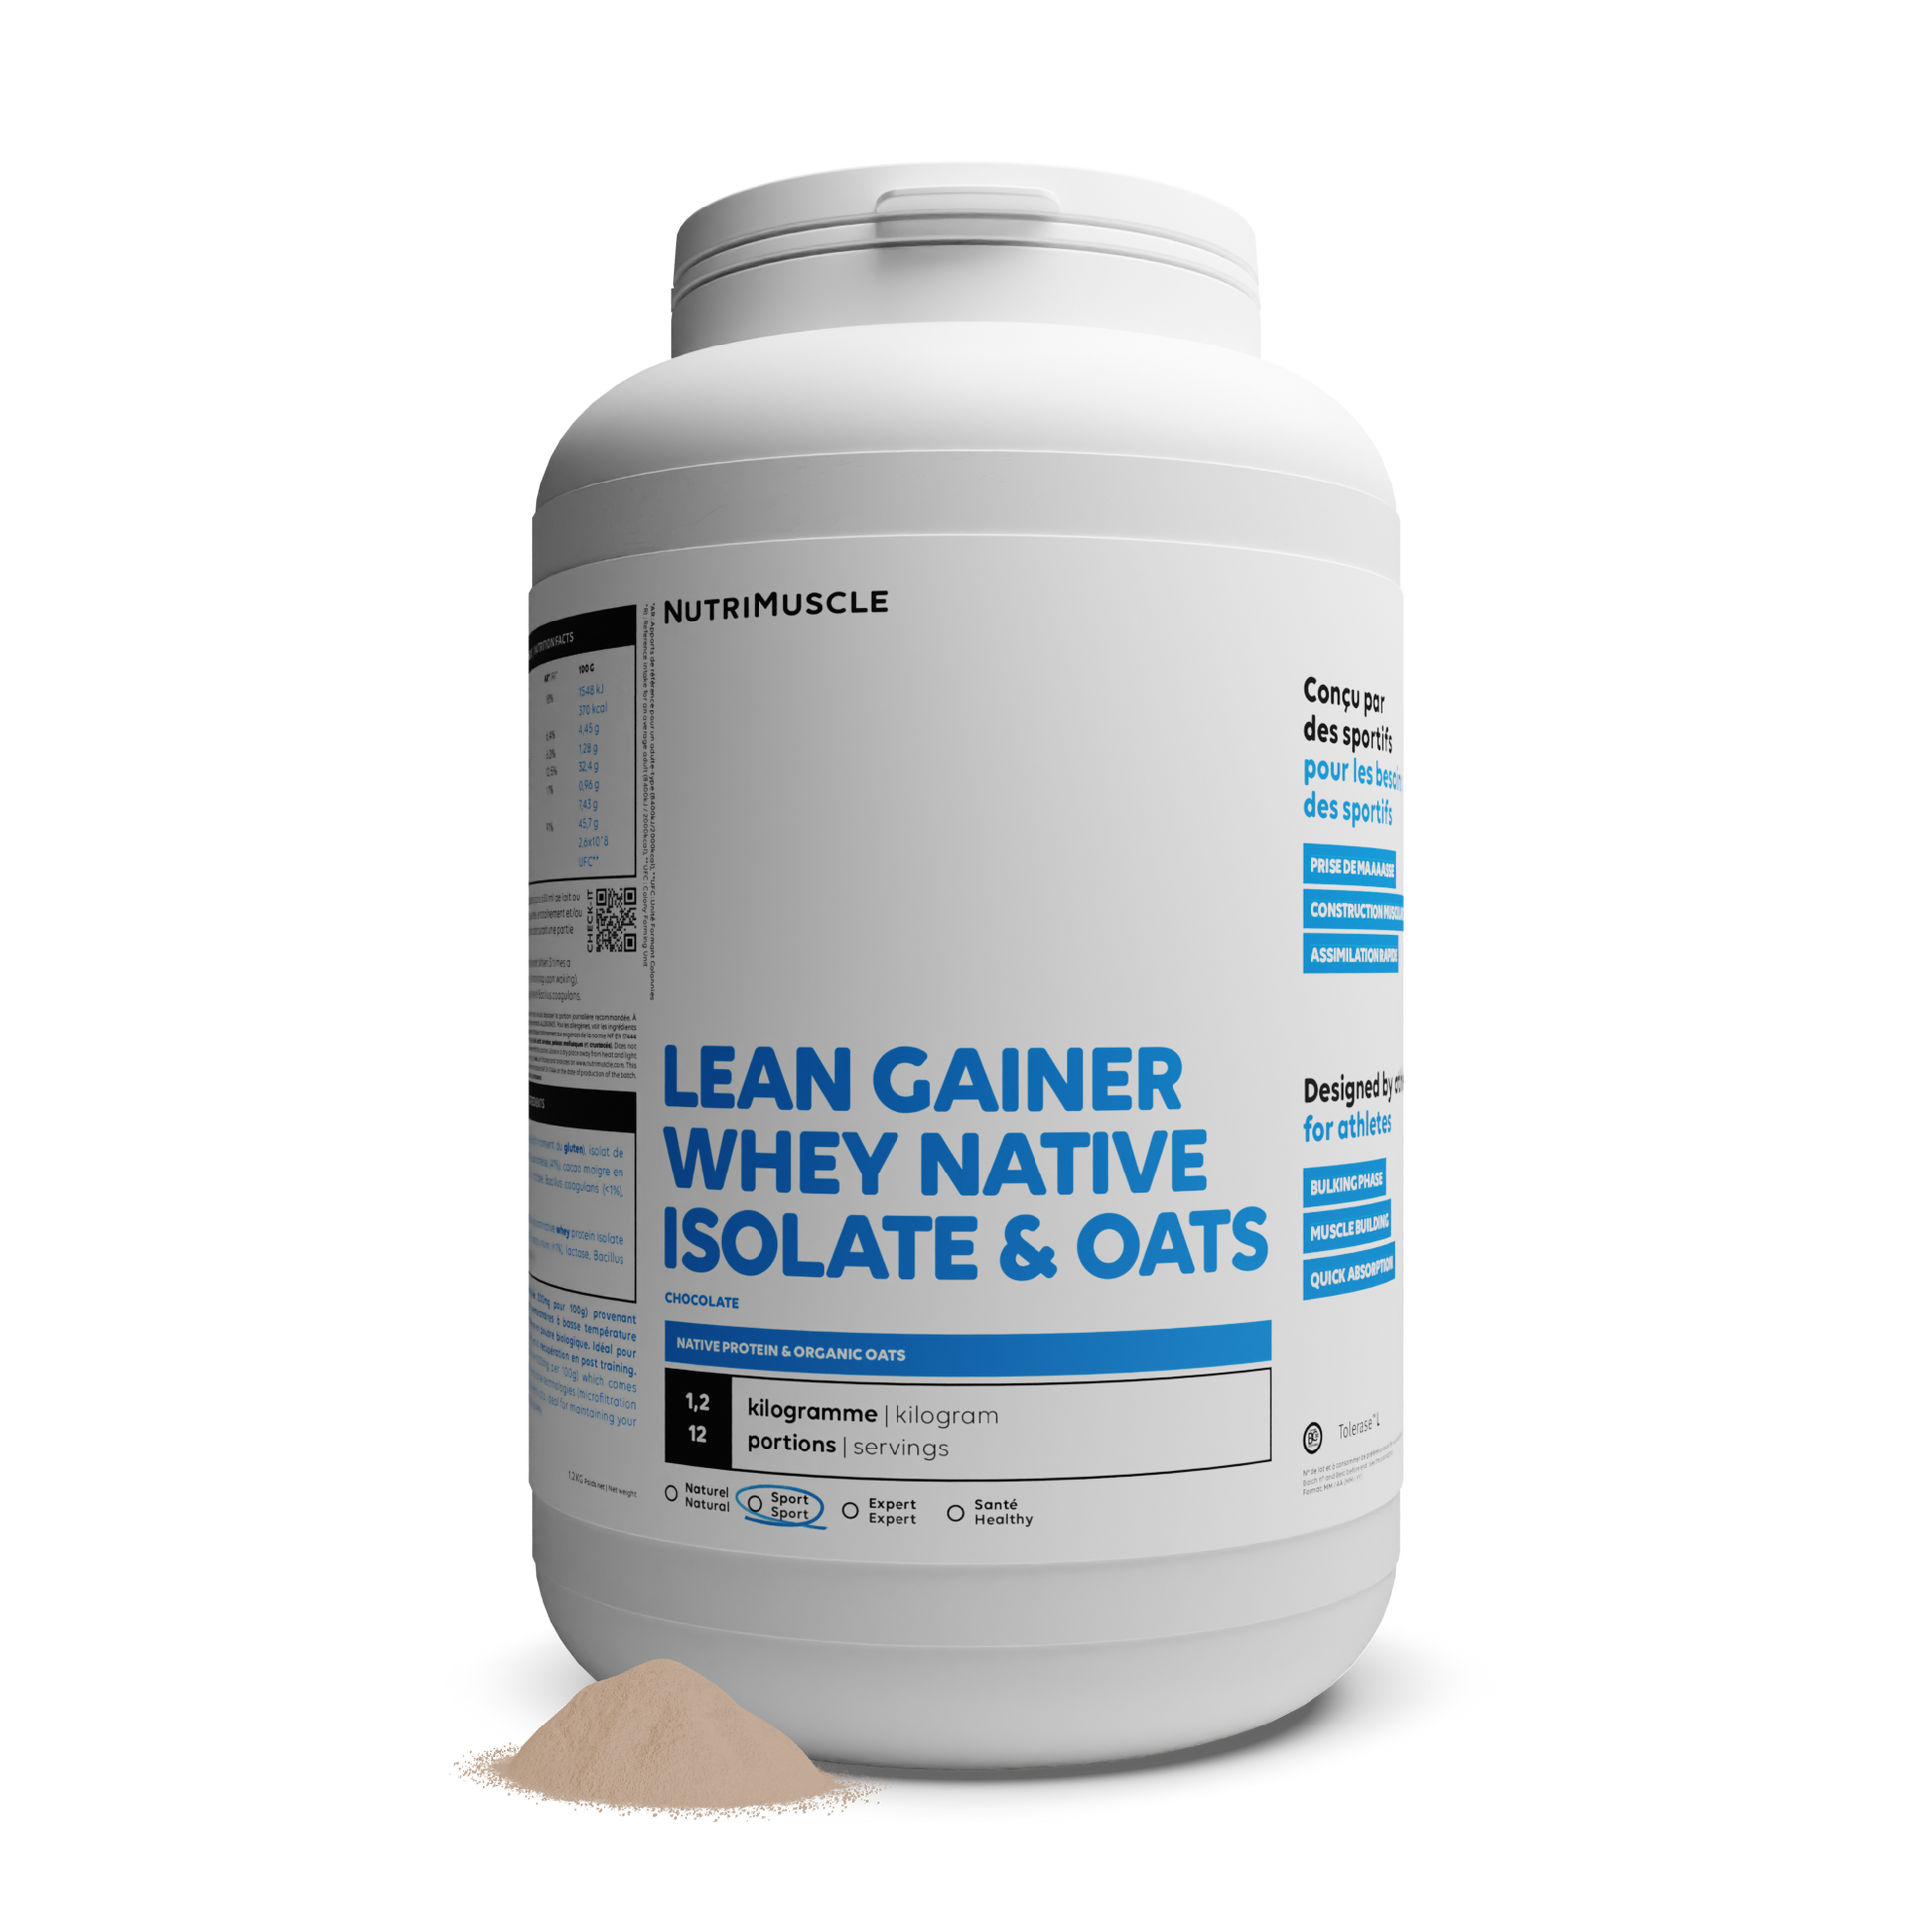 Lean Gainer isolate from Whey oats